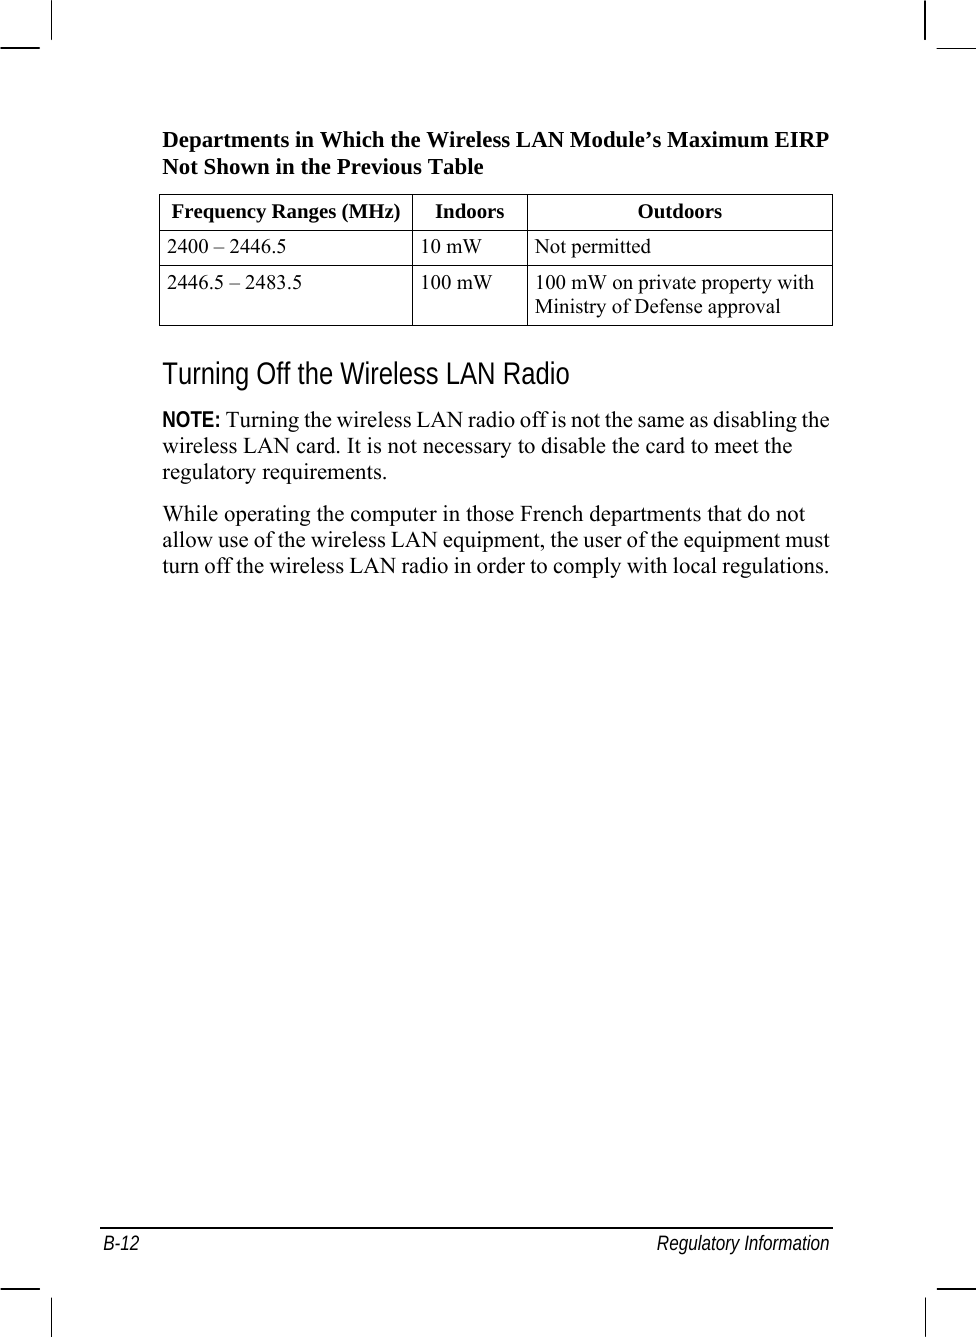  B-12 Regulatory Information Departments in Which the Wireless LAN Module’s Maximum EIRP Not Shown in the Previous Table Frequency Ranges (MHz) Indoors  Outdoors 2400 – 2446.5  10 mW  Not permitted 2446.5 – 2483.5  100 mW  100 mW on private property with Ministry of Defense approval  Turning Off the Wireless LAN Radio NOTE: Turning the wireless LAN radio off is not the same as disabling the wireless LAN card. It is not necessary to disable the card to meet the regulatory requirements. While operating the computer in those French departments that do not allow use of the wireless LAN equipment, the user of the equipment must turn off the wireless LAN radio in order to comply with local regulations. 